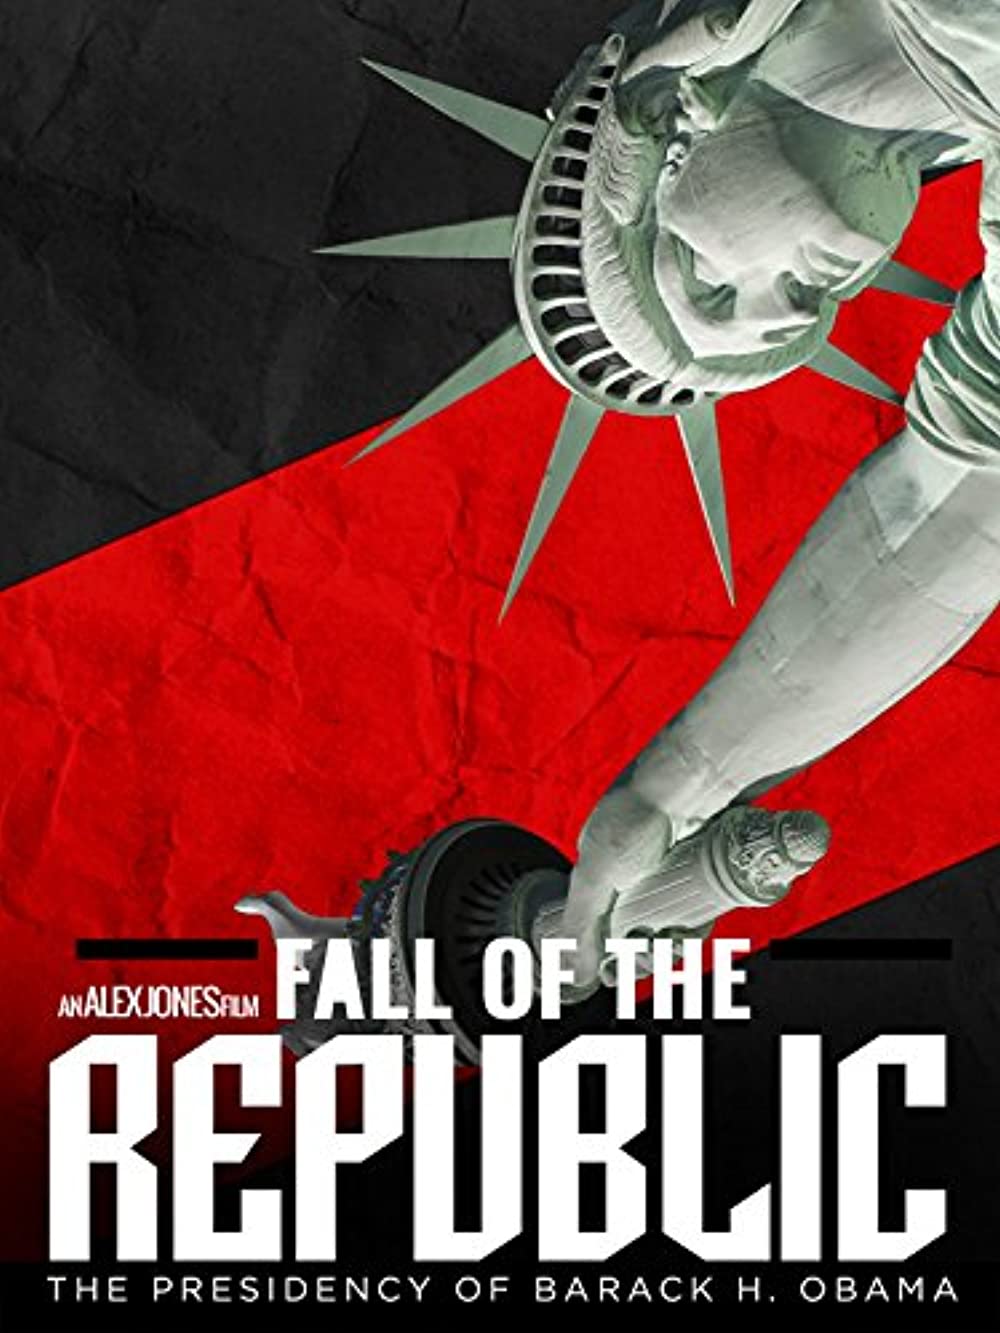 Download Fall of the Republic: The Presidency of Barack H. Obama Movie | Fall Of The Republic: The Presidency Of Barack H. Obama